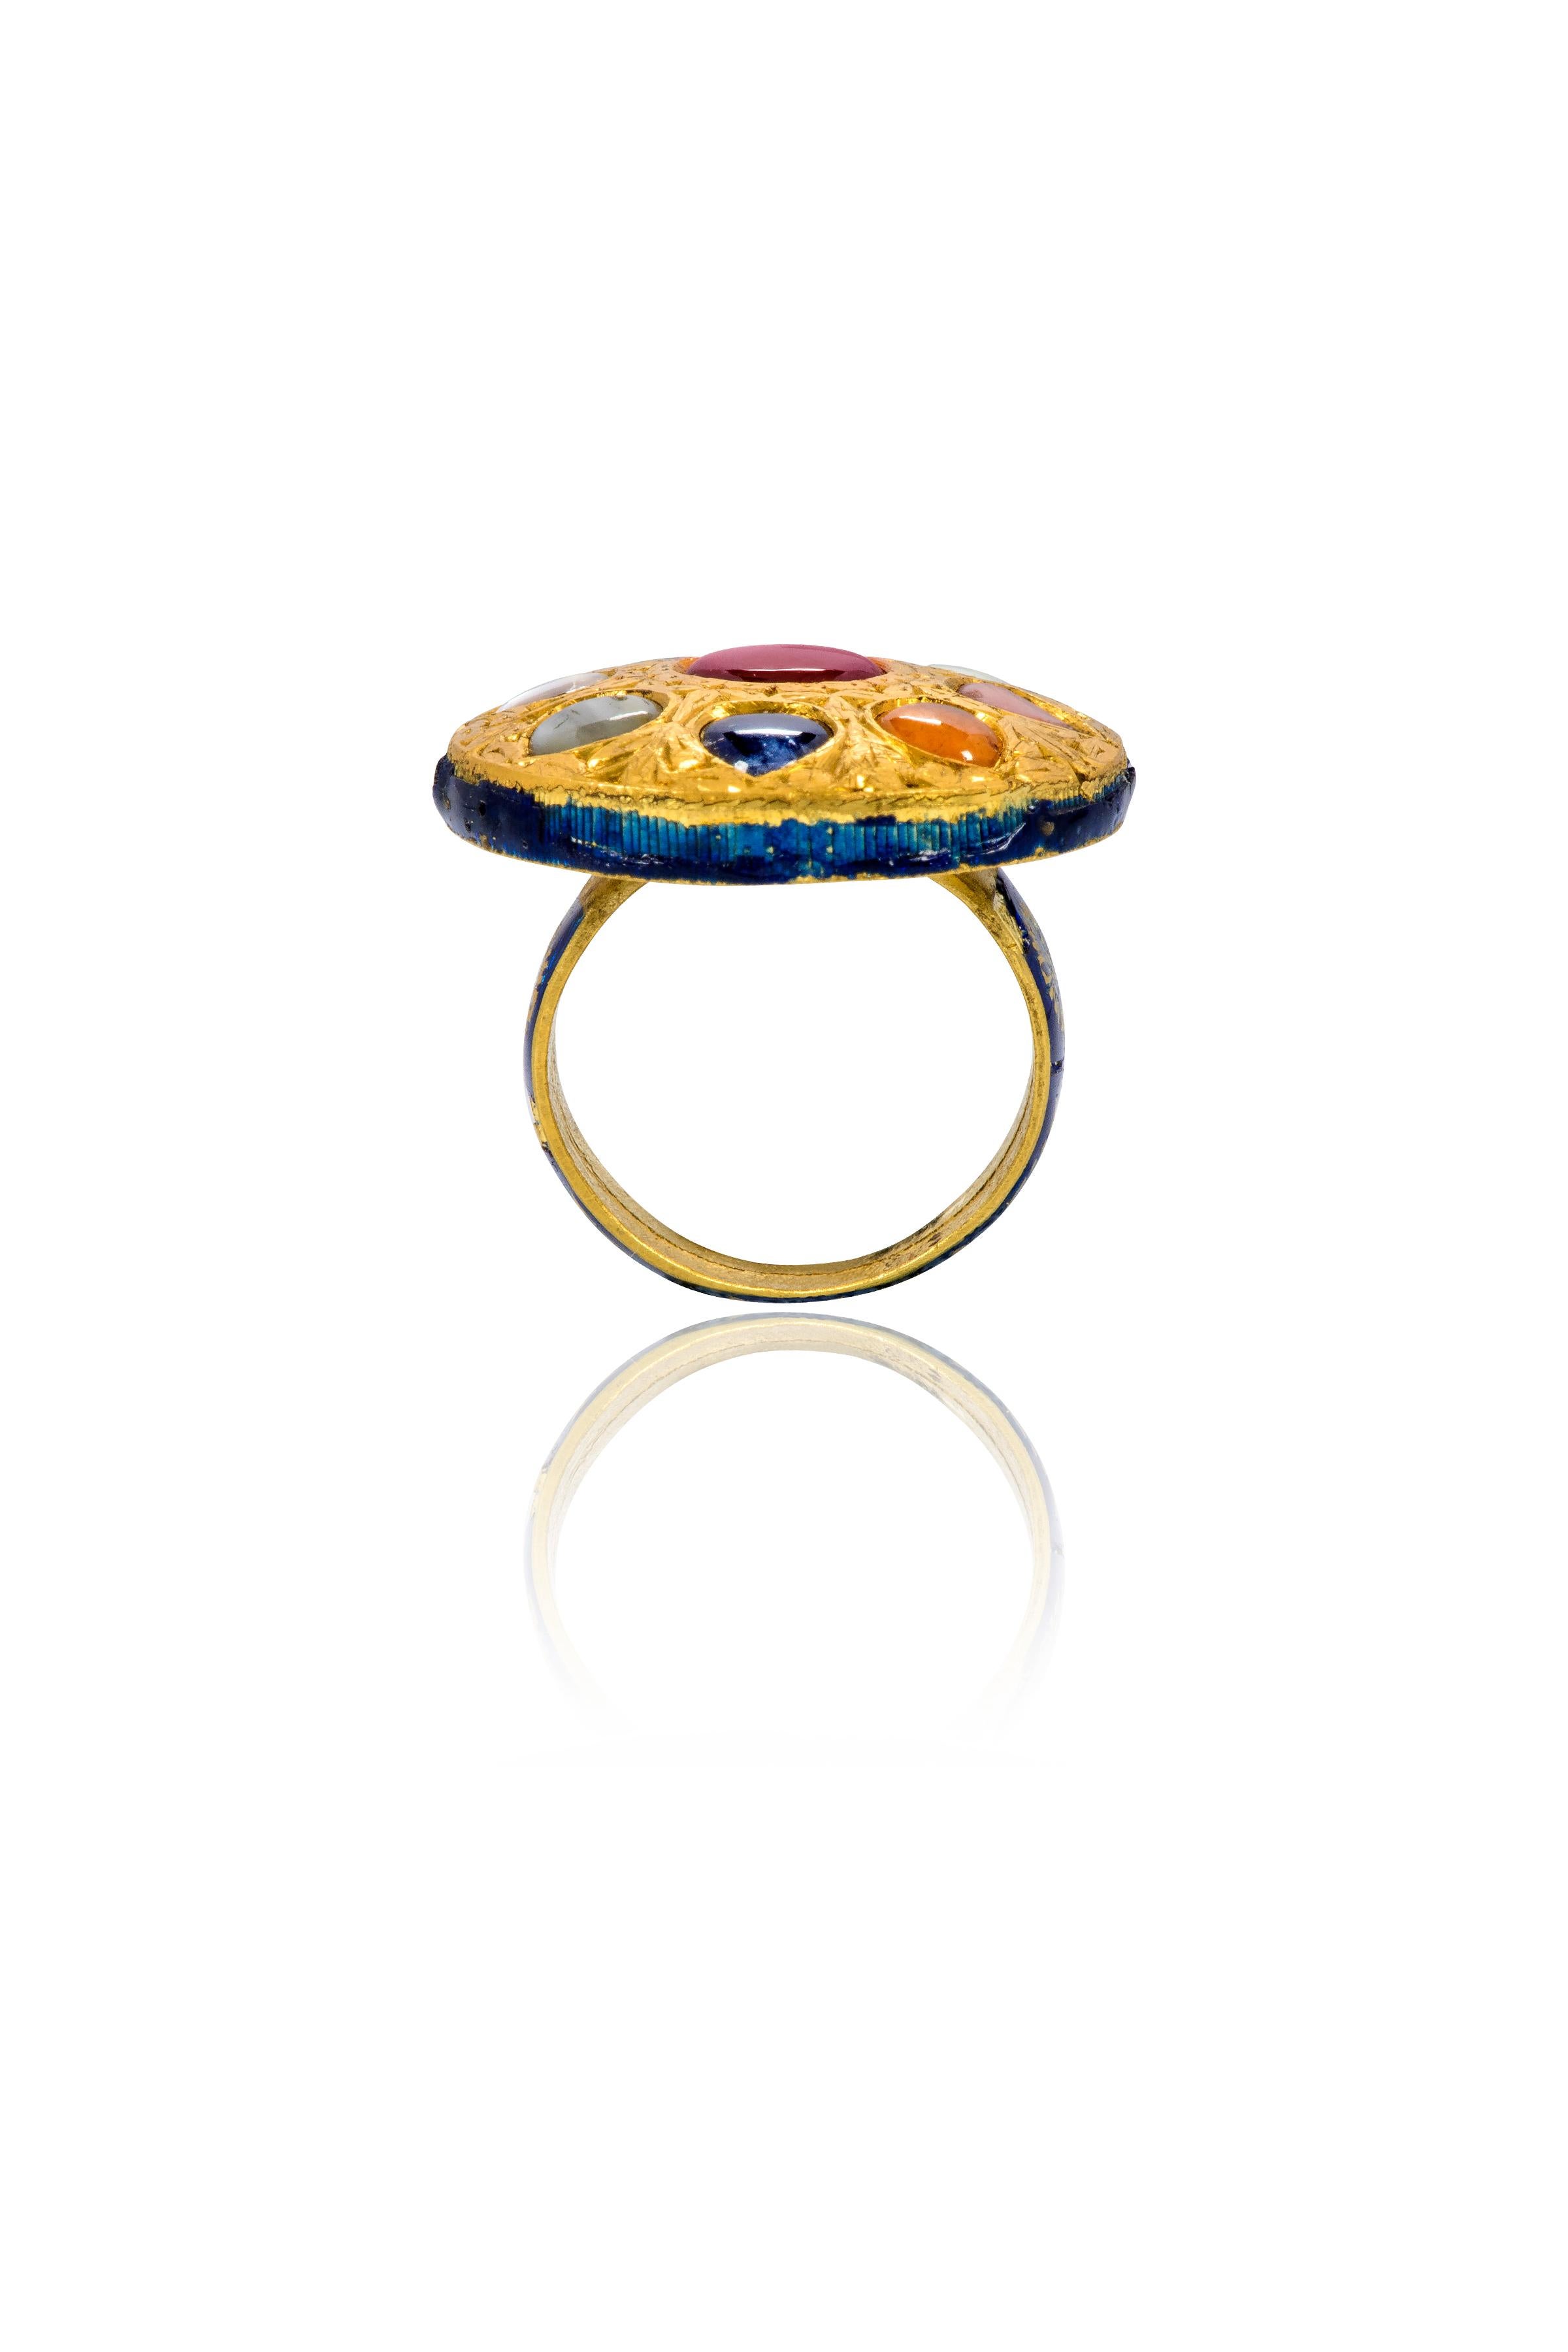 Anglo-Indian 22 Karat Gold Nine Precious Gems Cocktail Ring with Blue Enamel Work